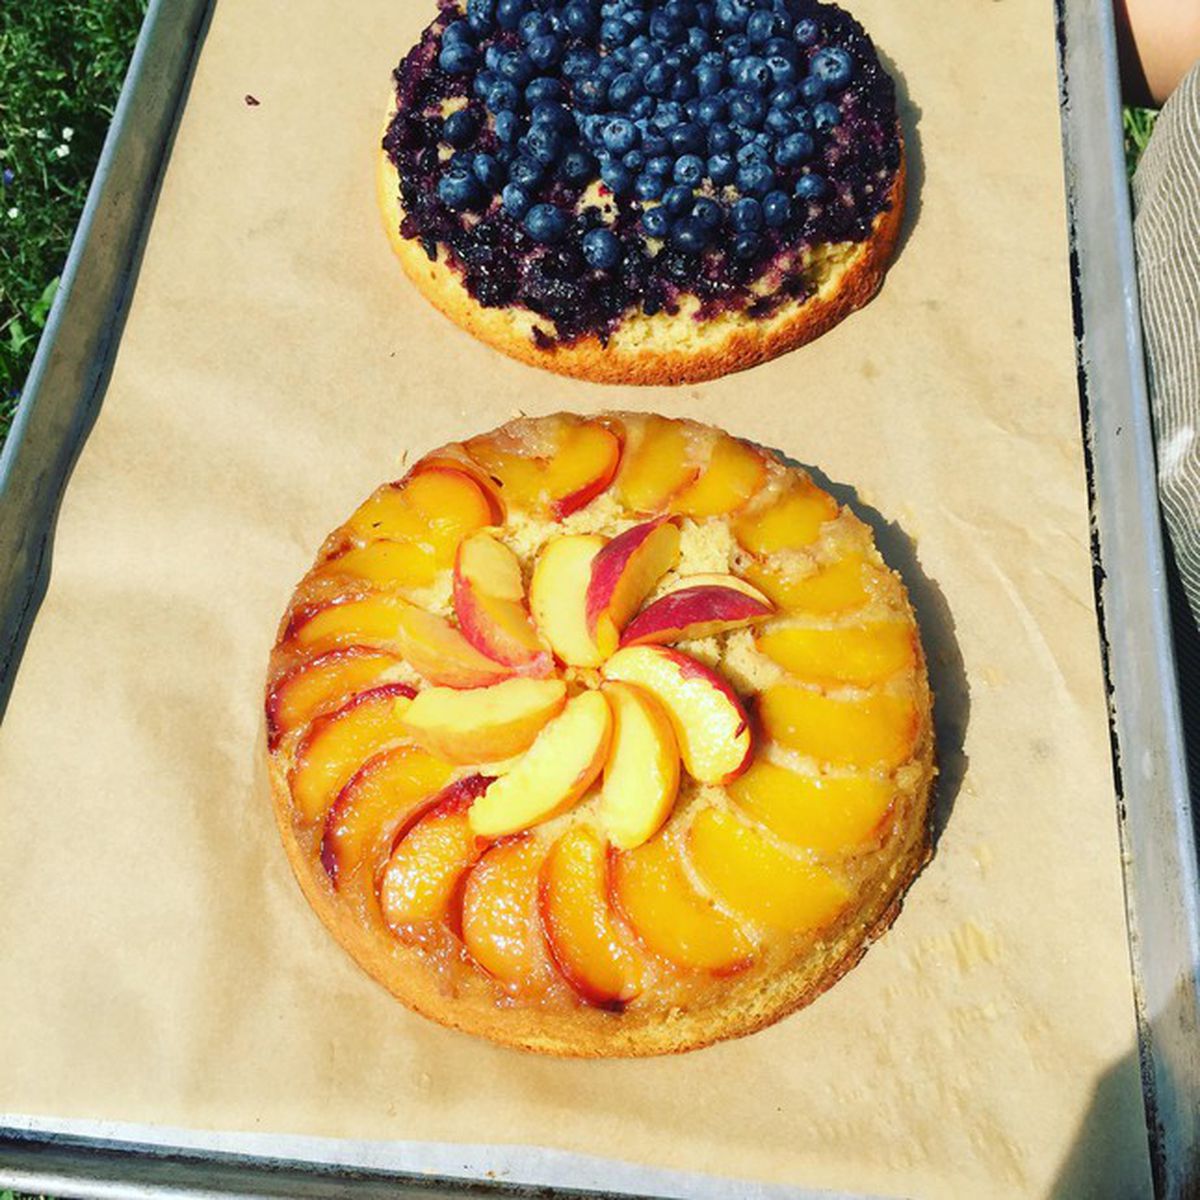 Peach and blueberry tarts